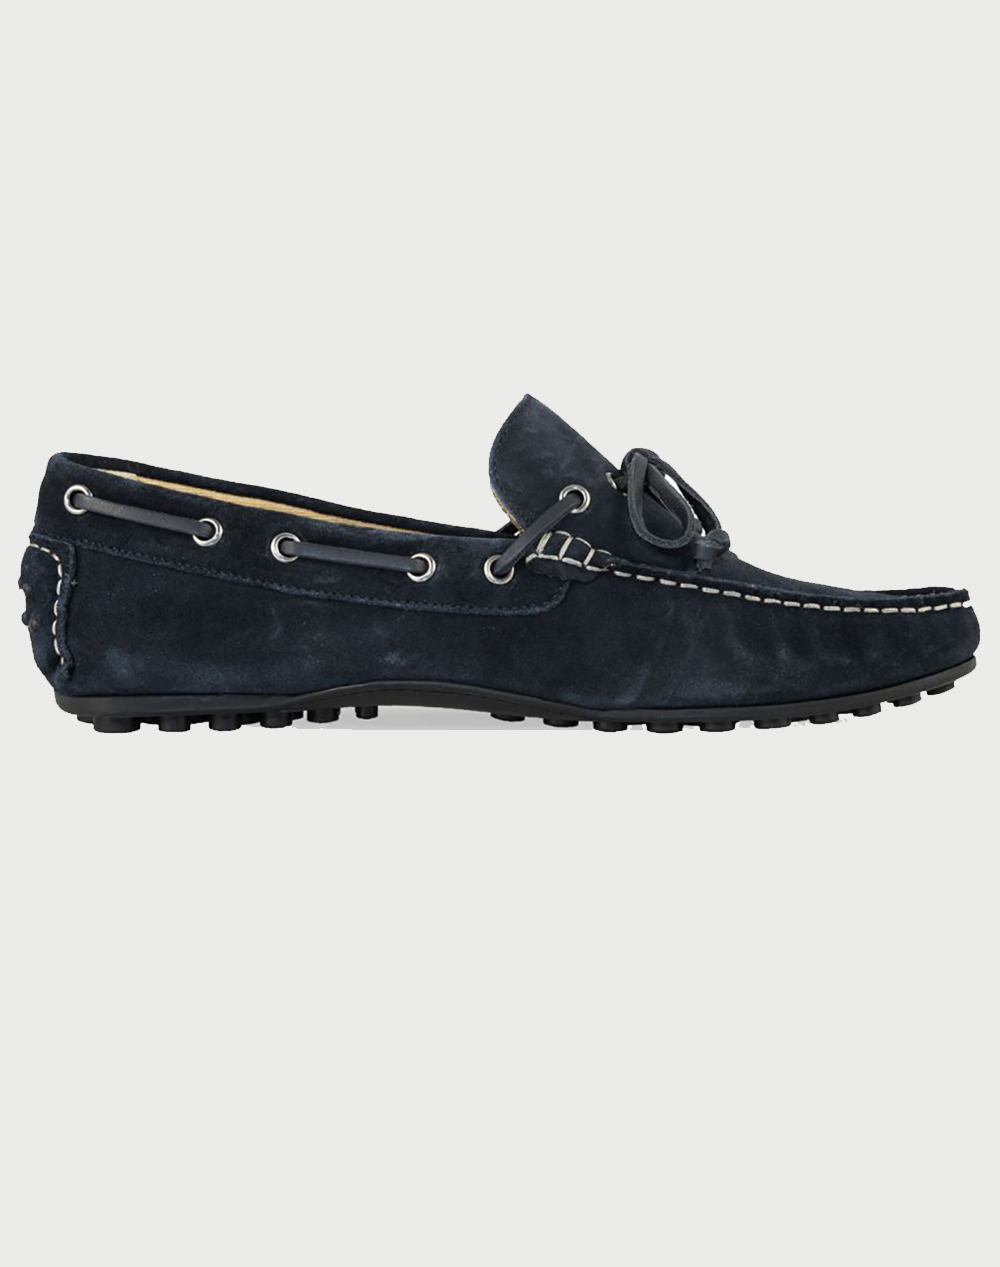 LUMBERJACK MAIN DRIVE MOCASSIN LACE UP SUEDE ΠΑΠΟΥΤΣΙ ΑΝΔΡΙΚΟ SM81802002A01CC026 DarkBlue